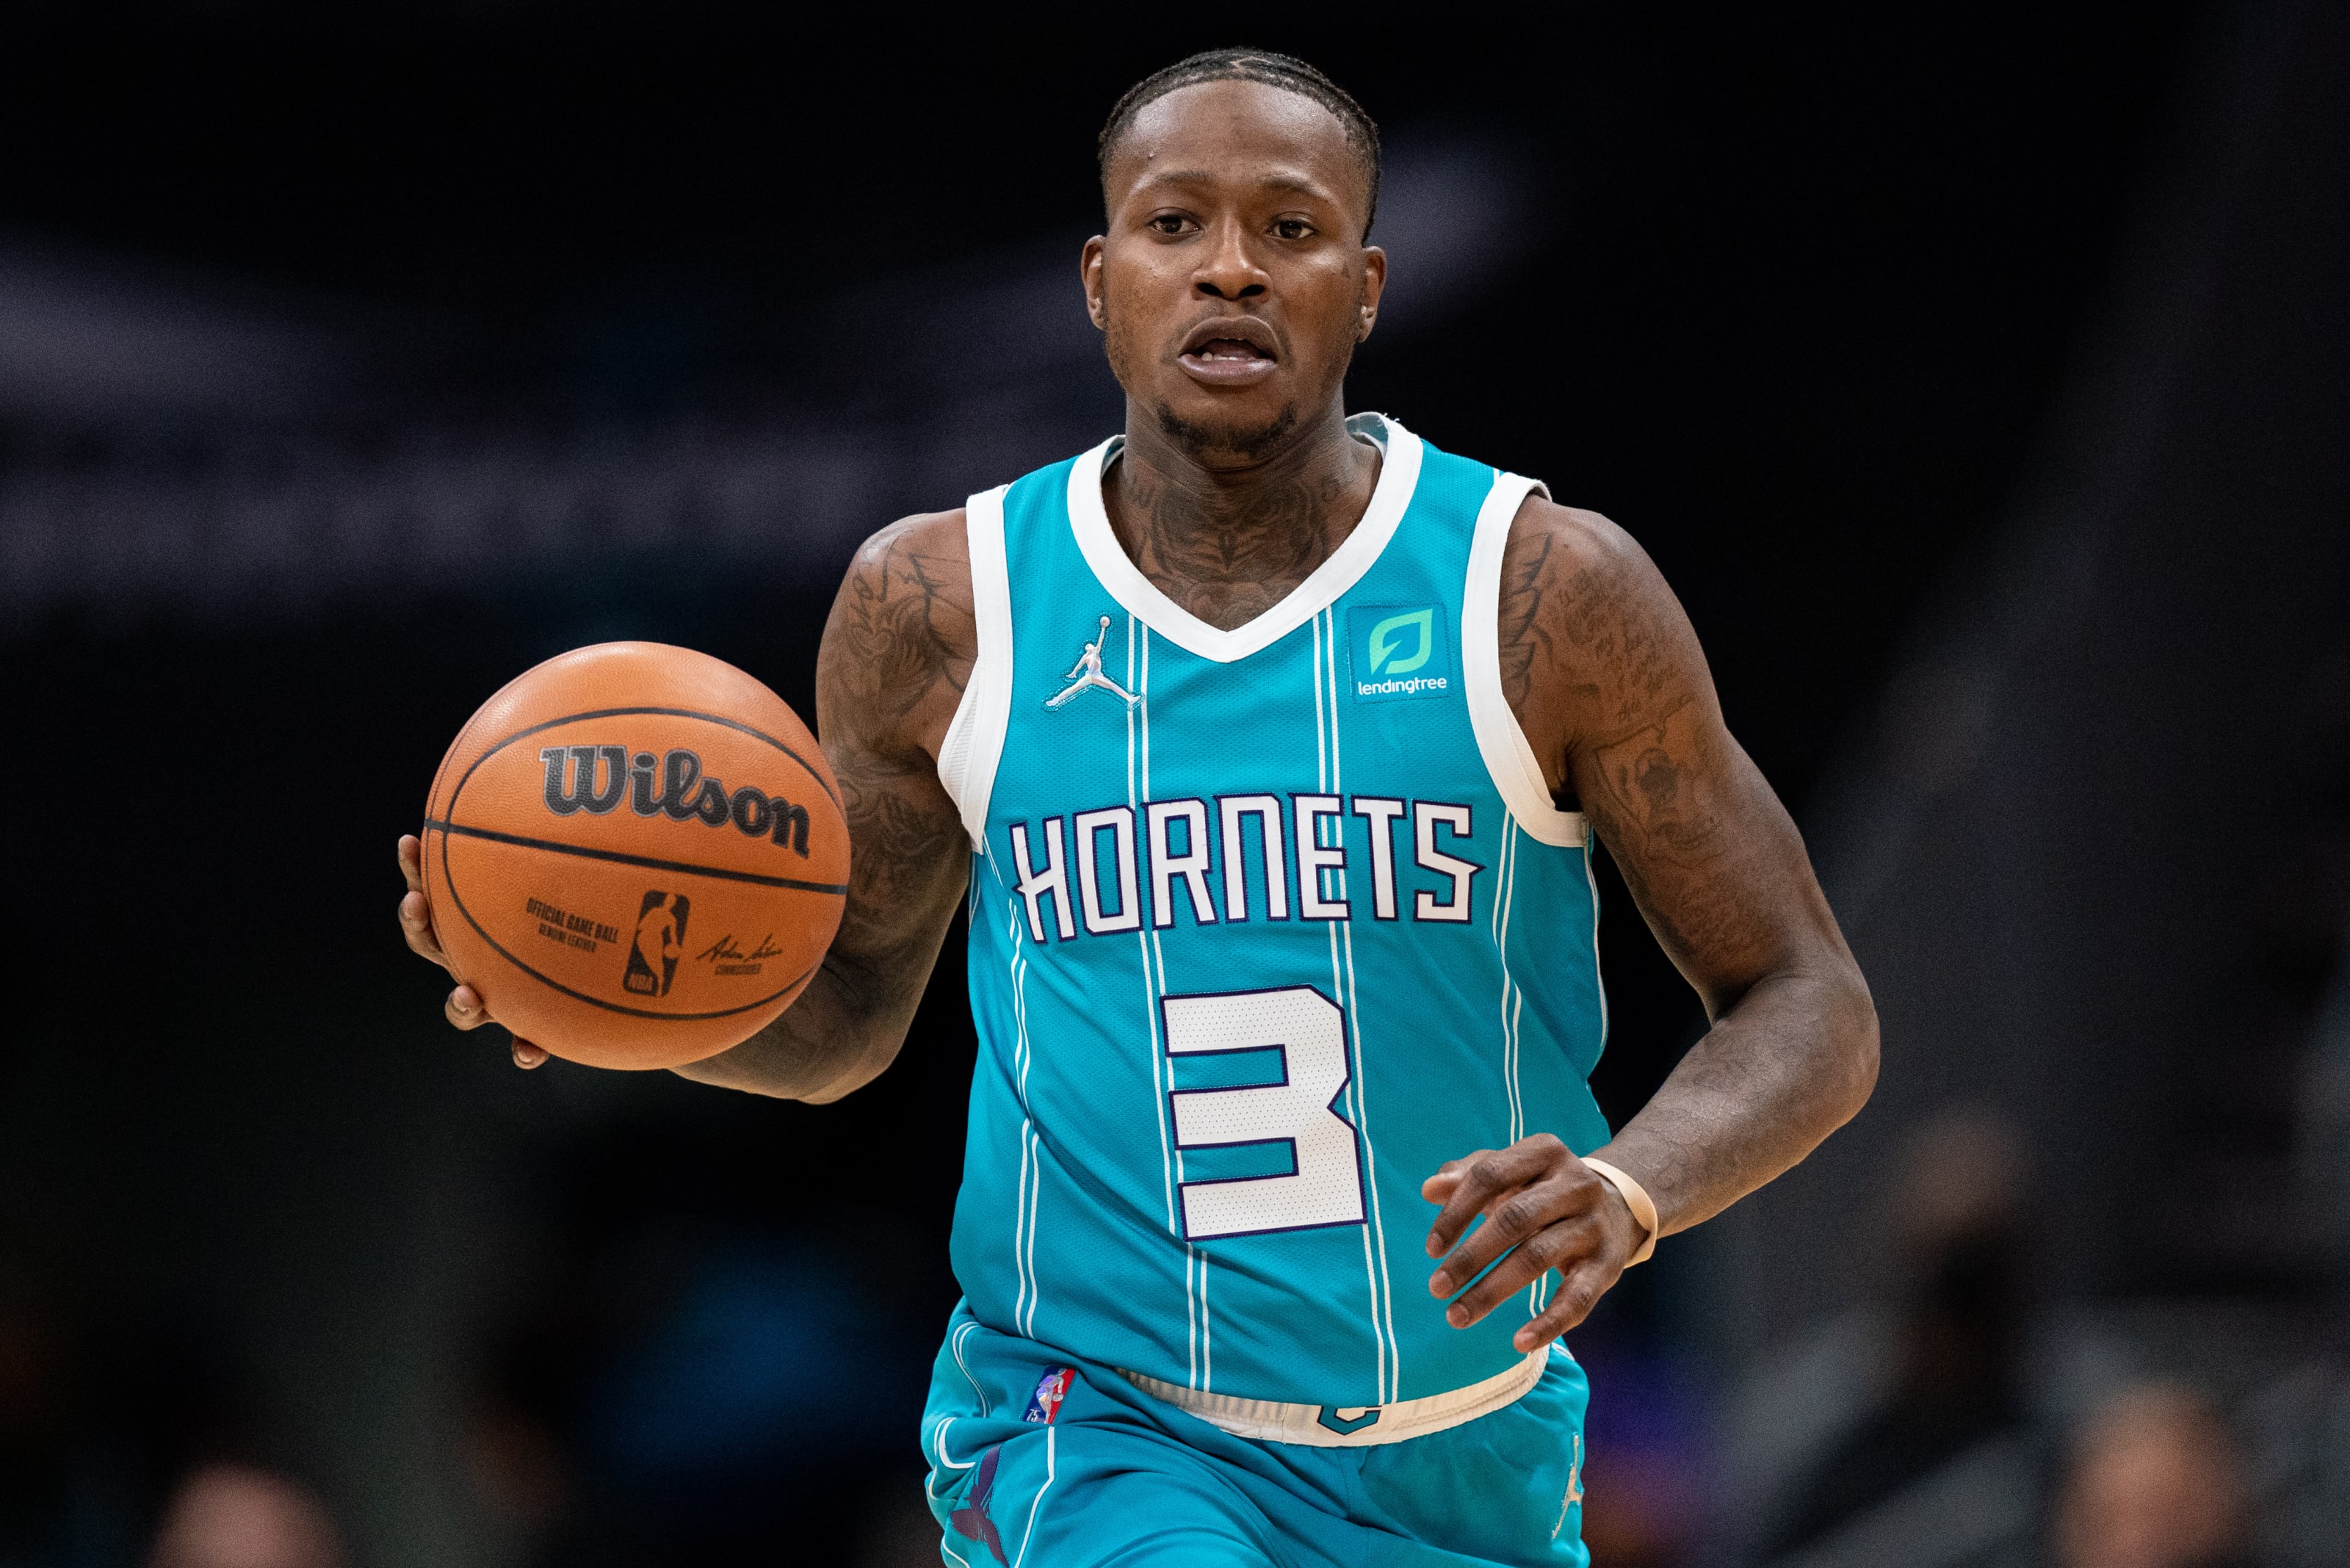 Former Louisville star Terry Rozier key to Celtics' success